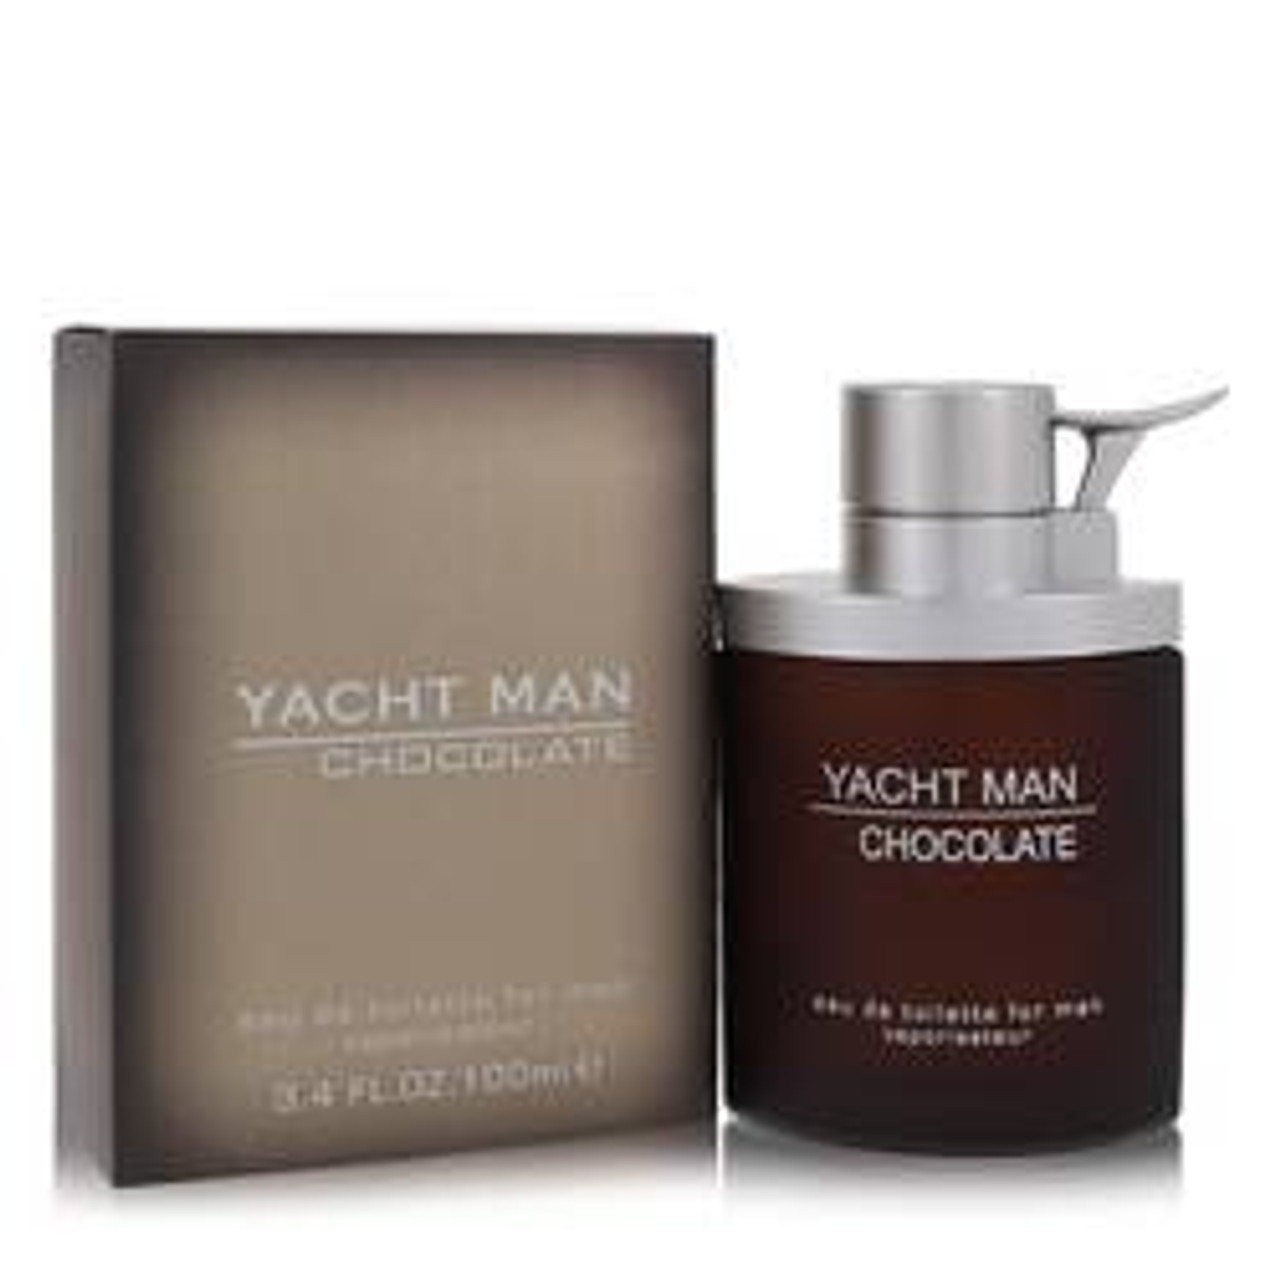 Yacht Man Chocolate Cologne By Myrurgia Eau De Toilette Spray 3.4 oz for Men - [From 19.00 - Choose pk Qty ] - *Ships from Miami